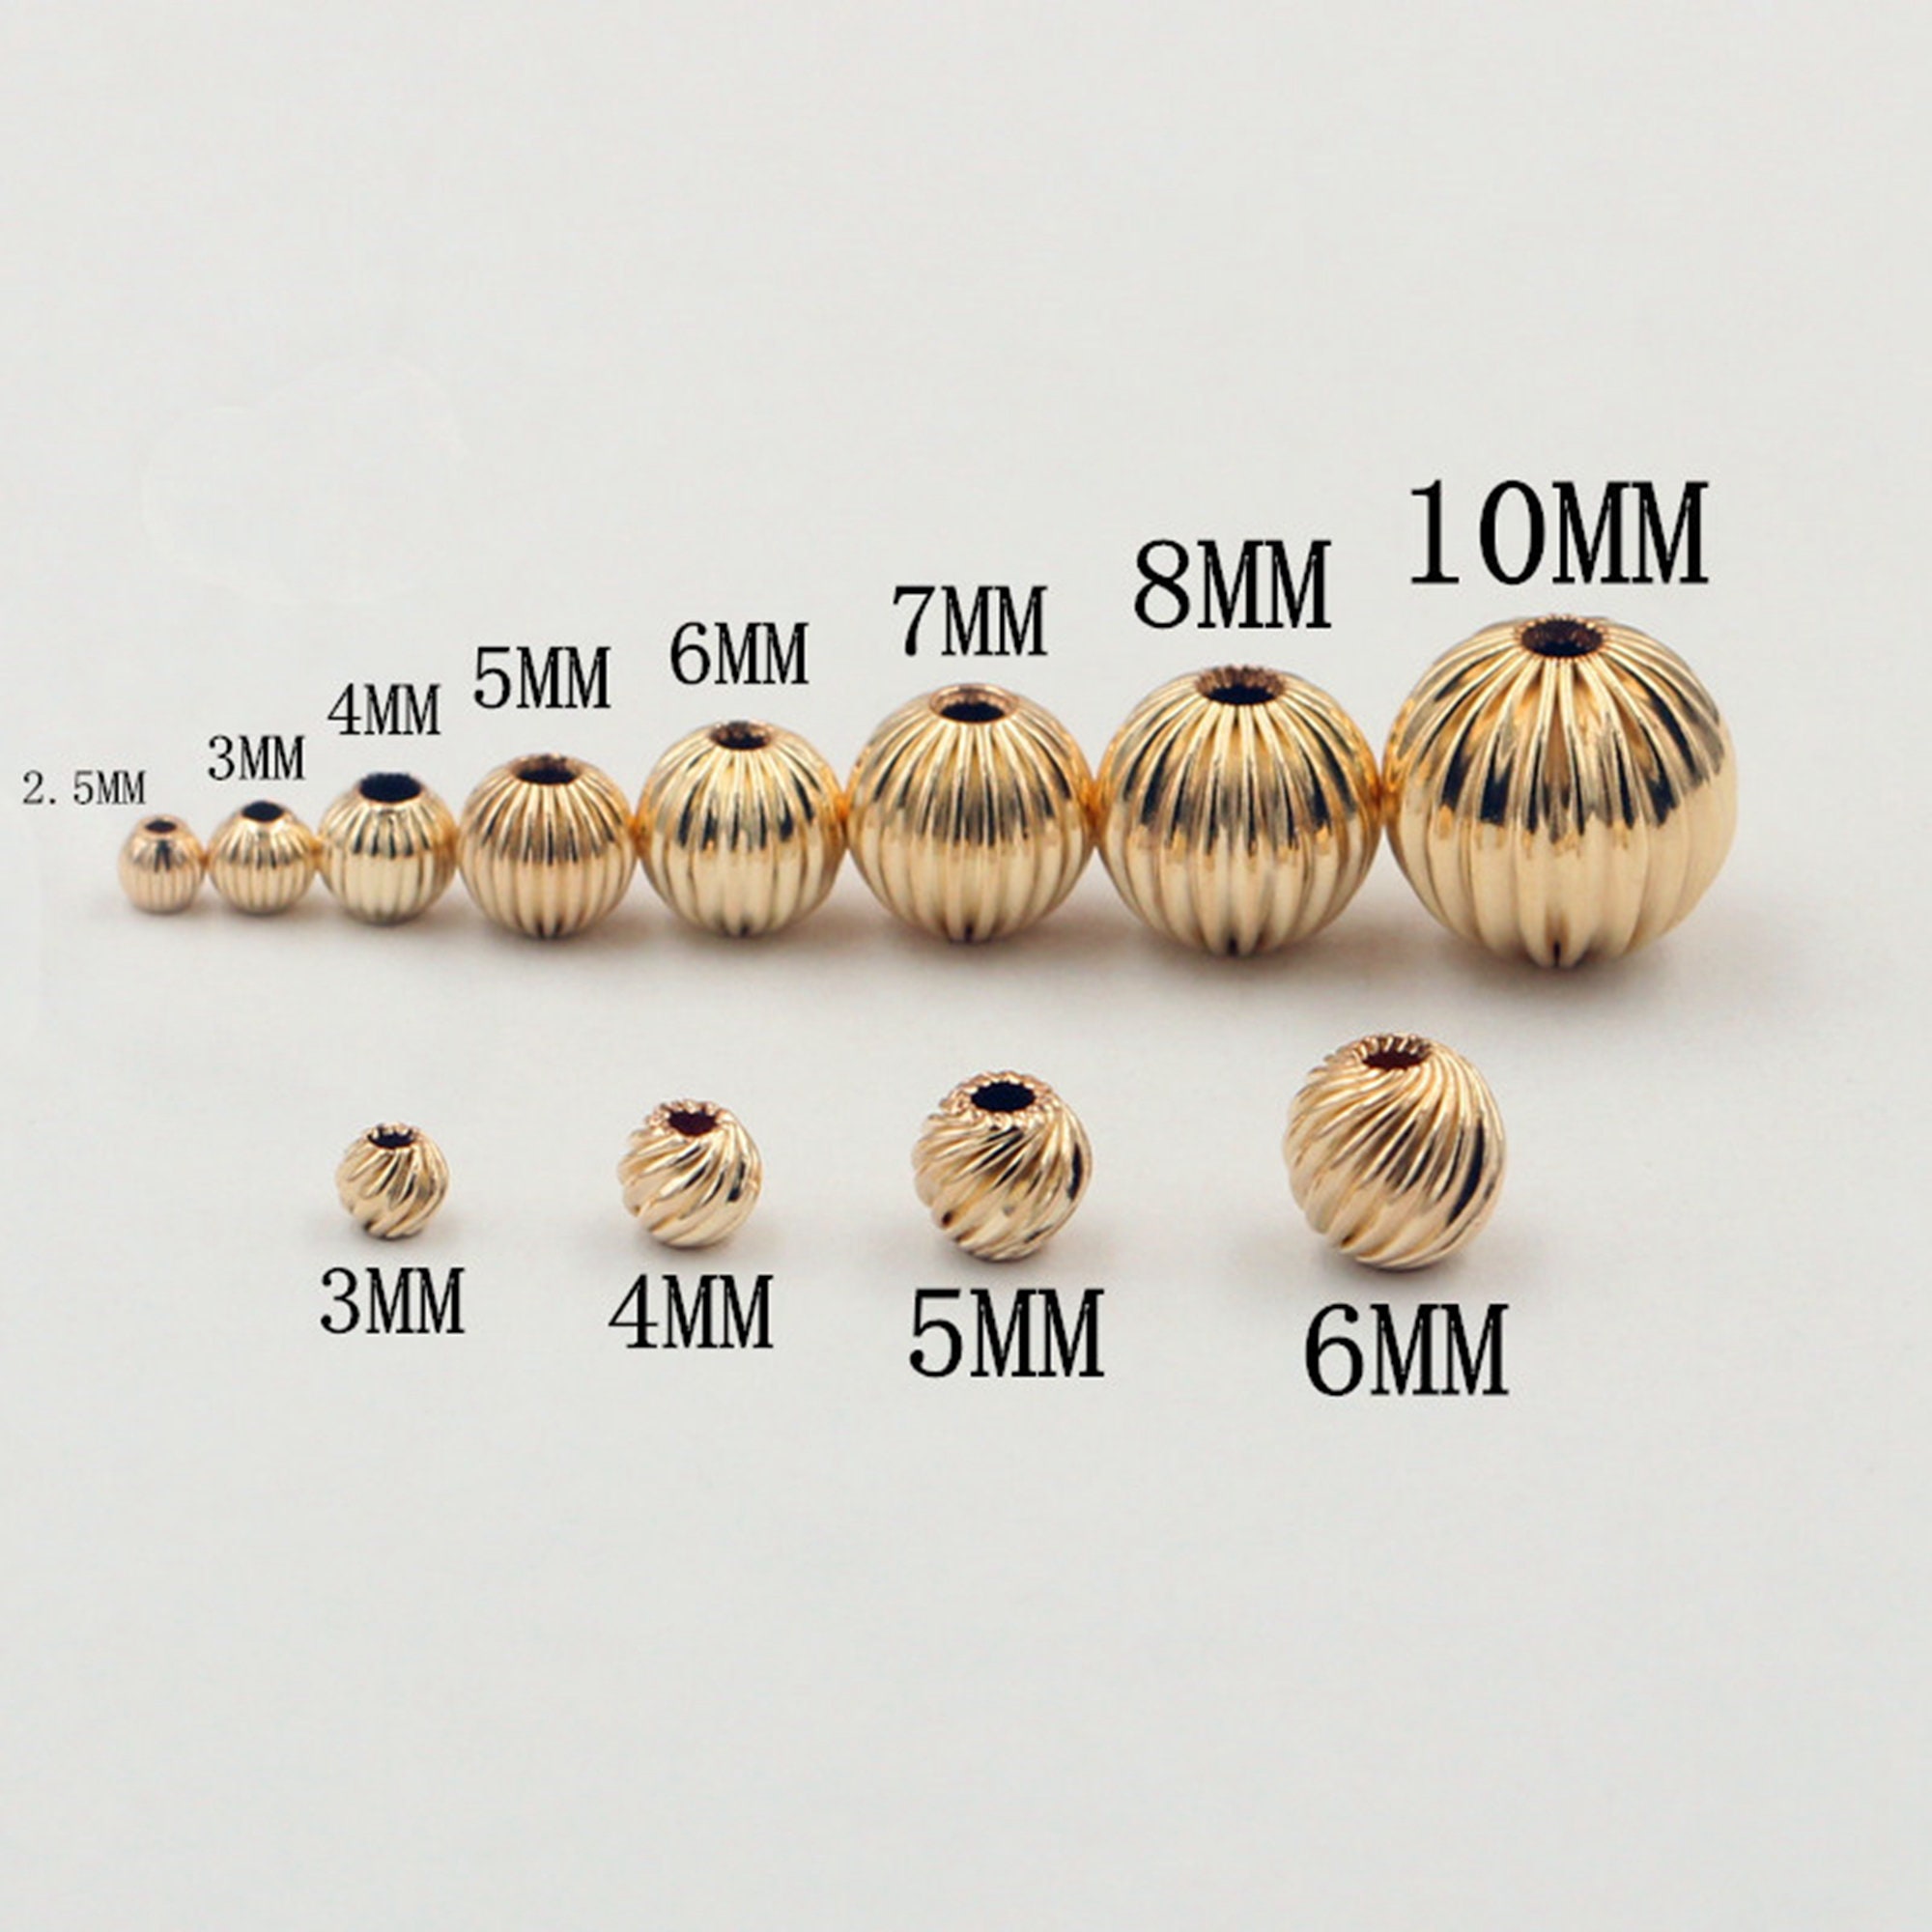 Sterling Silver Crimp Cover Beads, S925 Silver Crimp Beads for Jewelry  Making Supplies, Cover Bead 